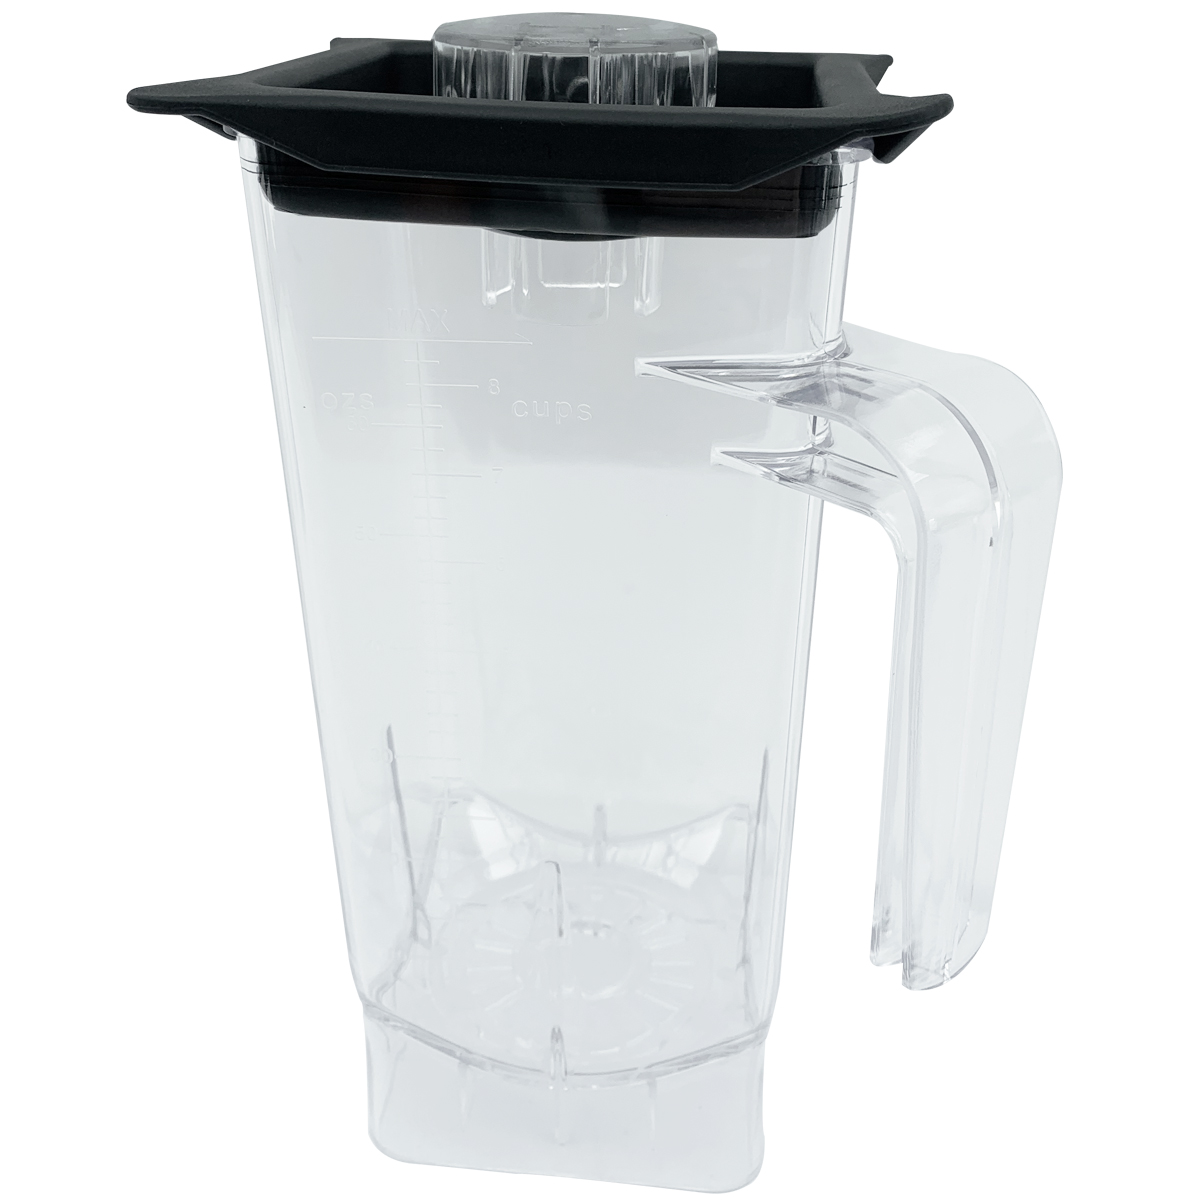 Cater-Mix CKP8083 Spare Jug for Cater-Mix CK0083